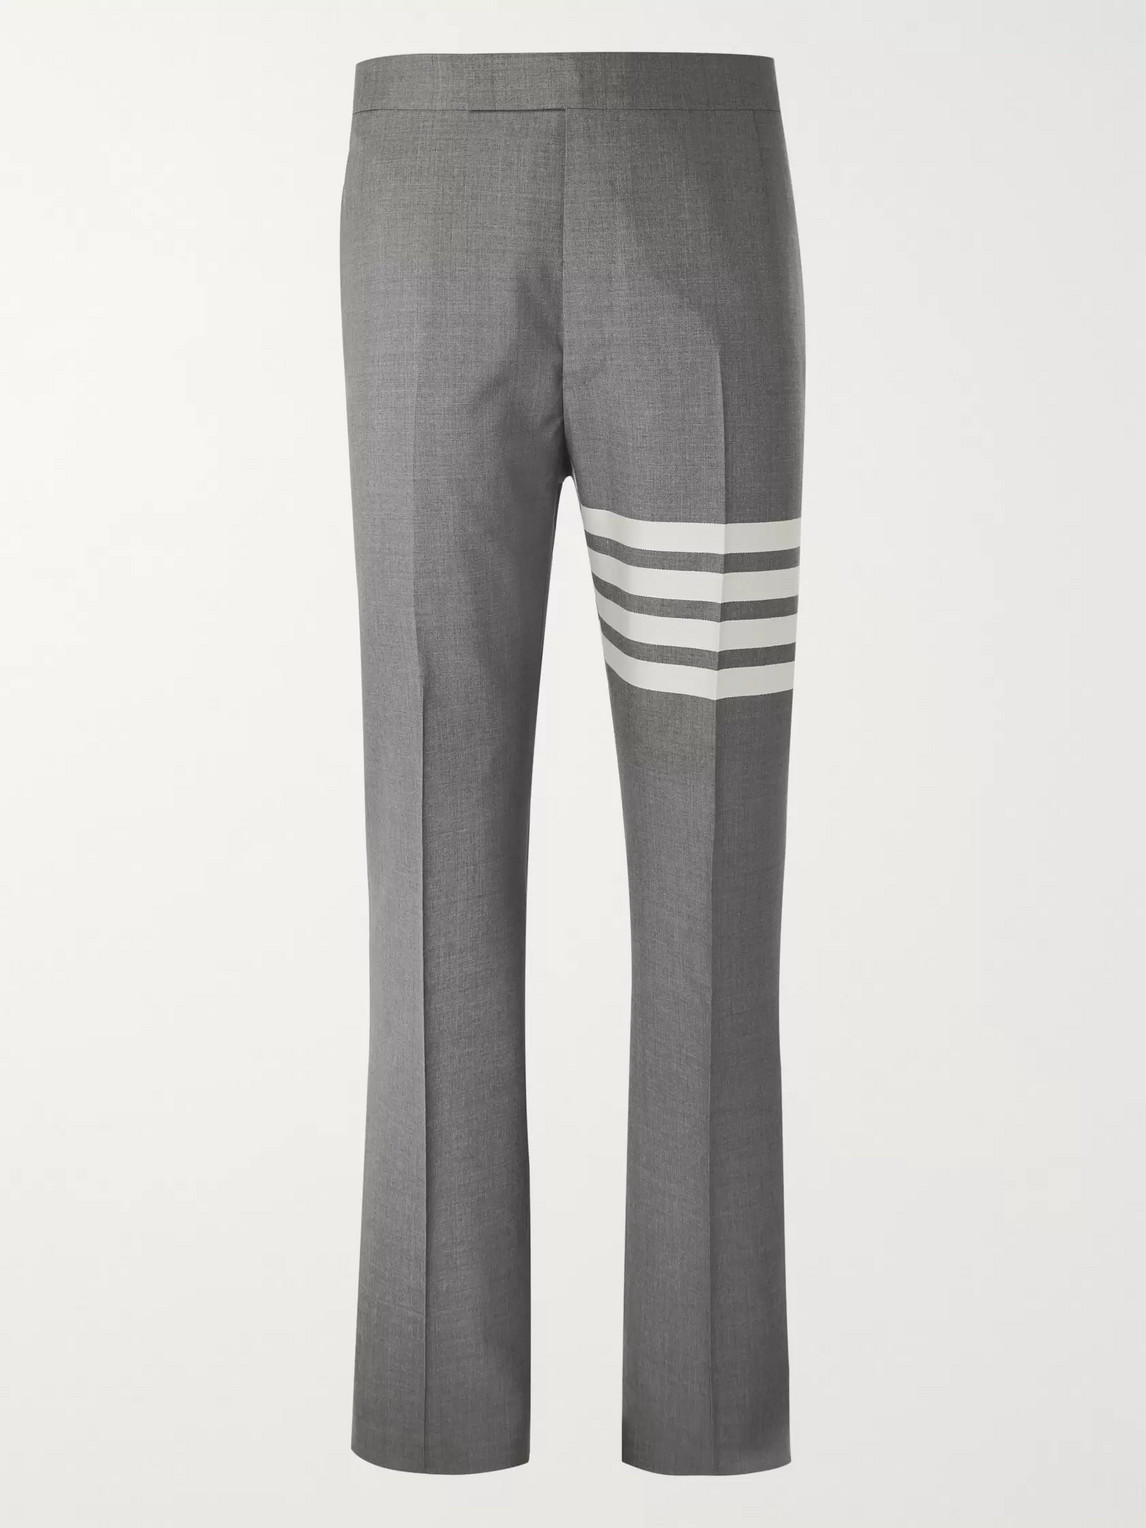 THOM BROWNE GREY SLIM-FIT TAPERED STRIPED WOOL SUIT TROUSERS